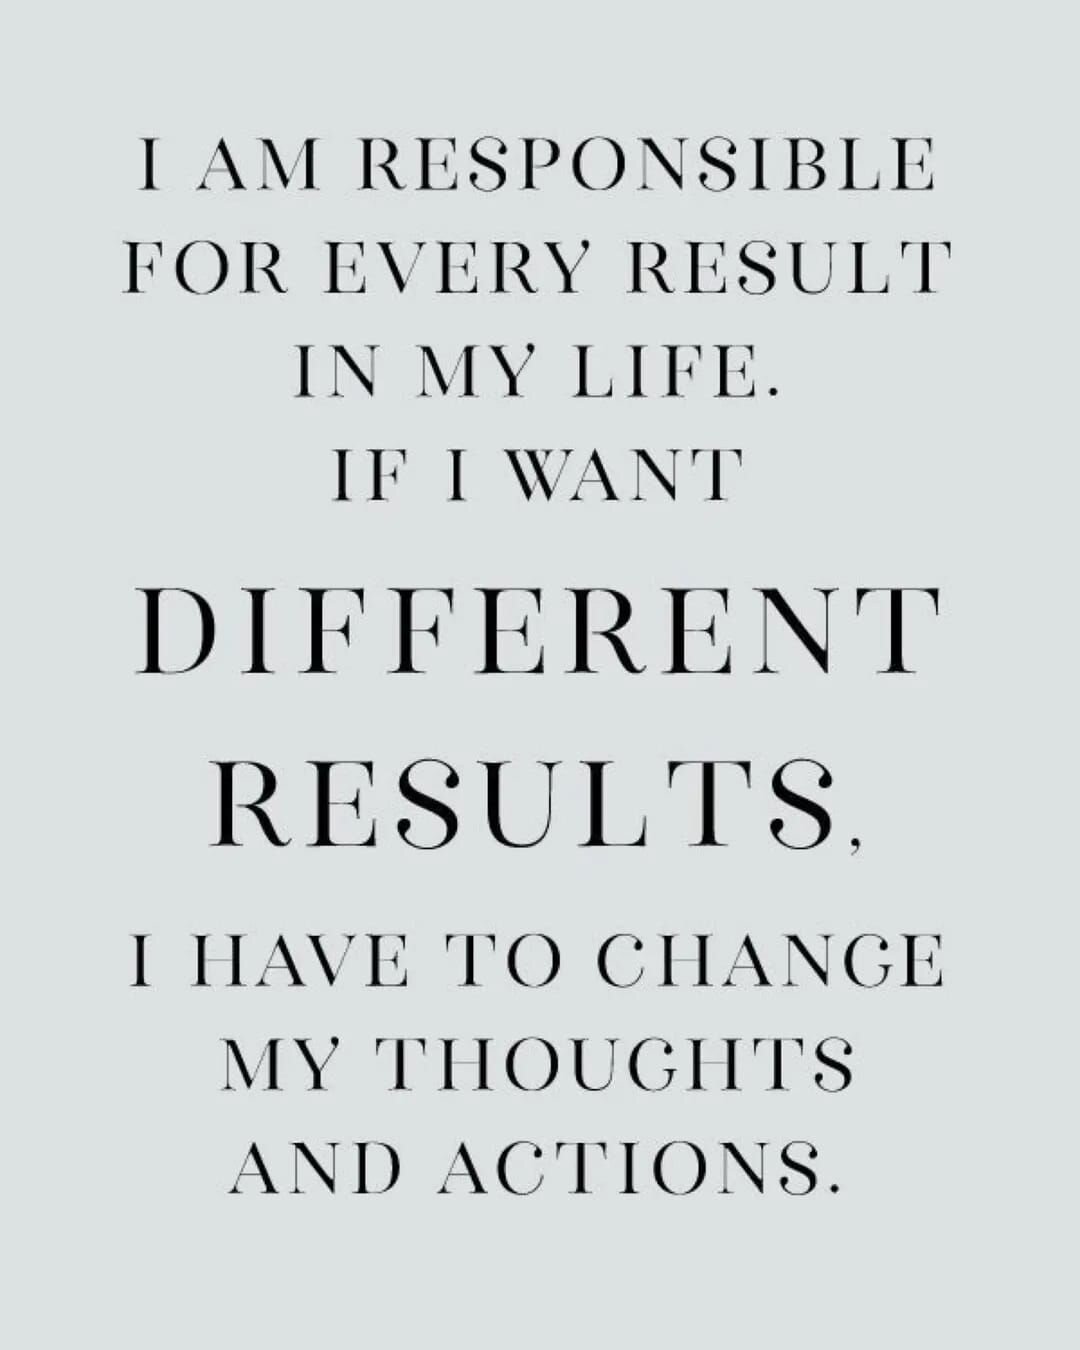 &quot;I AM RESPONSIBLE FOR EVERY RESULT IN MY LIFE.⁣
IF I WANT DIFFERENT RESULTS, I HAVE TO CHANGE⁣
MY THOUGHTS AND ACTIONS.&quot;⁣
~ UNKNOWN⁣
⁣
Love this quote, not sure who stated it originally.